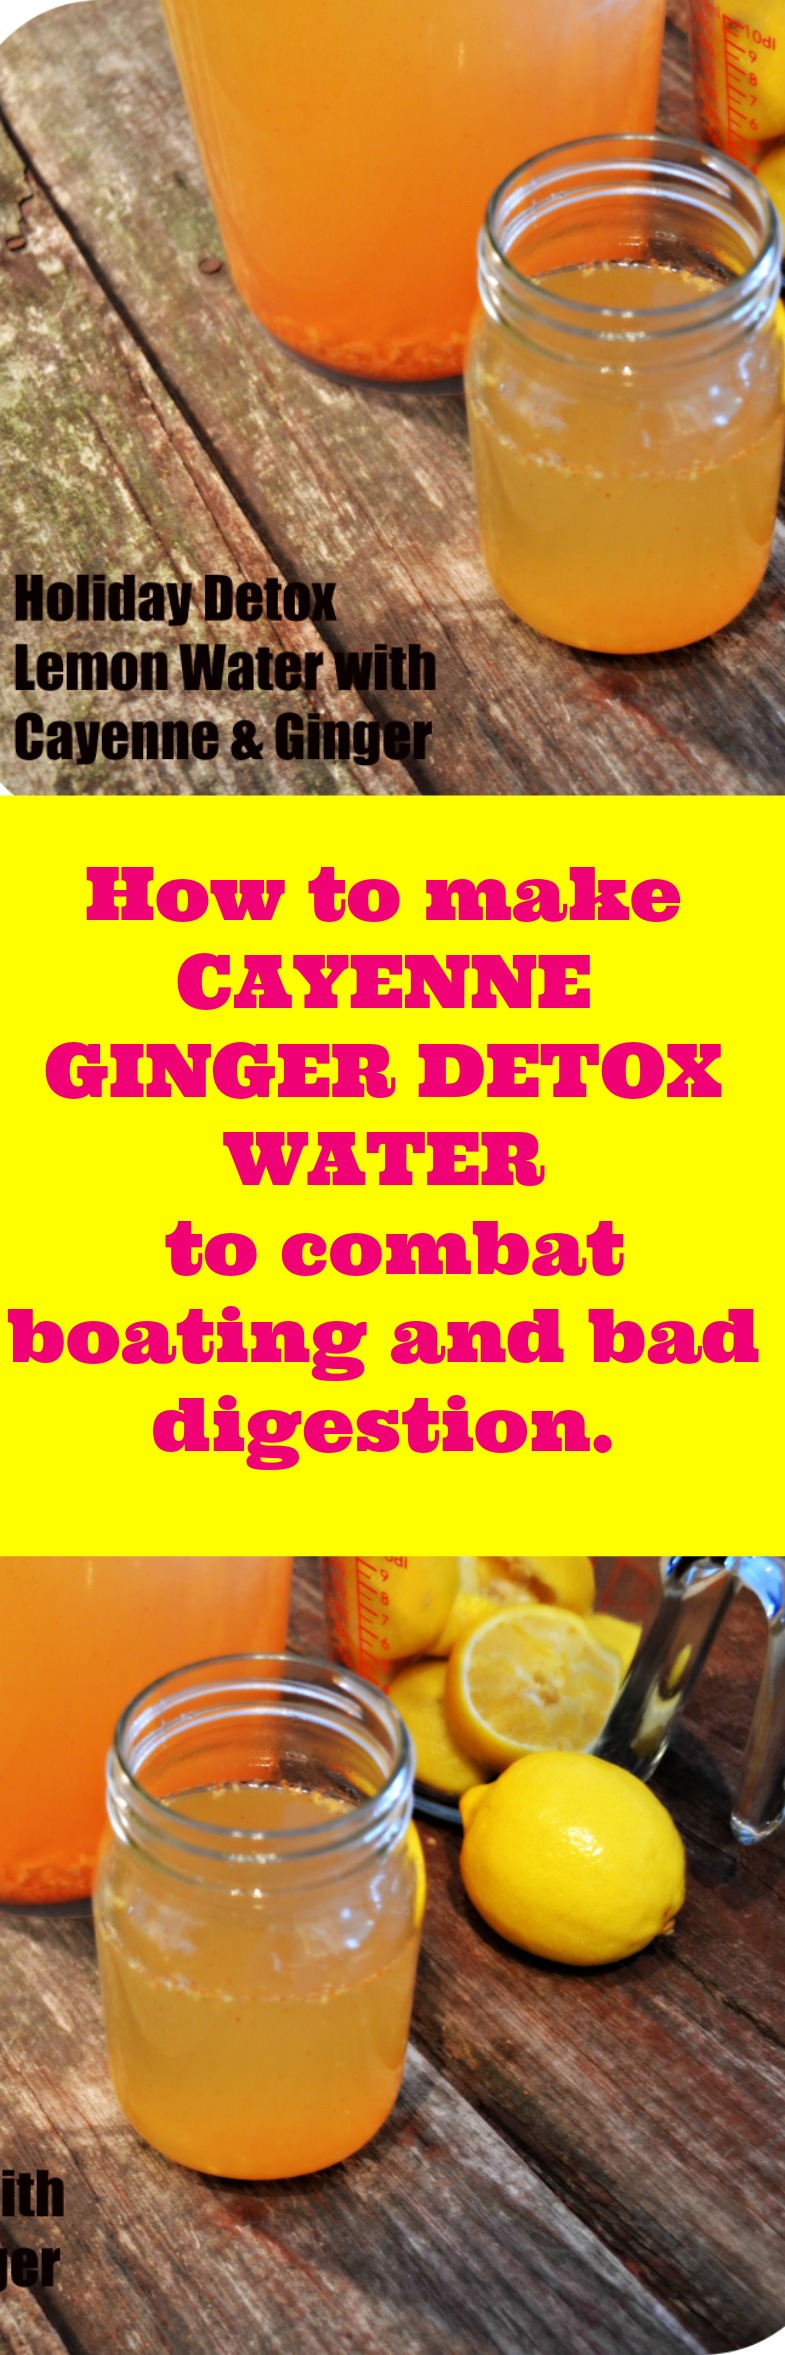 How to make CAYENNE GINGER DETOX WATER to combat boating and bad digestion